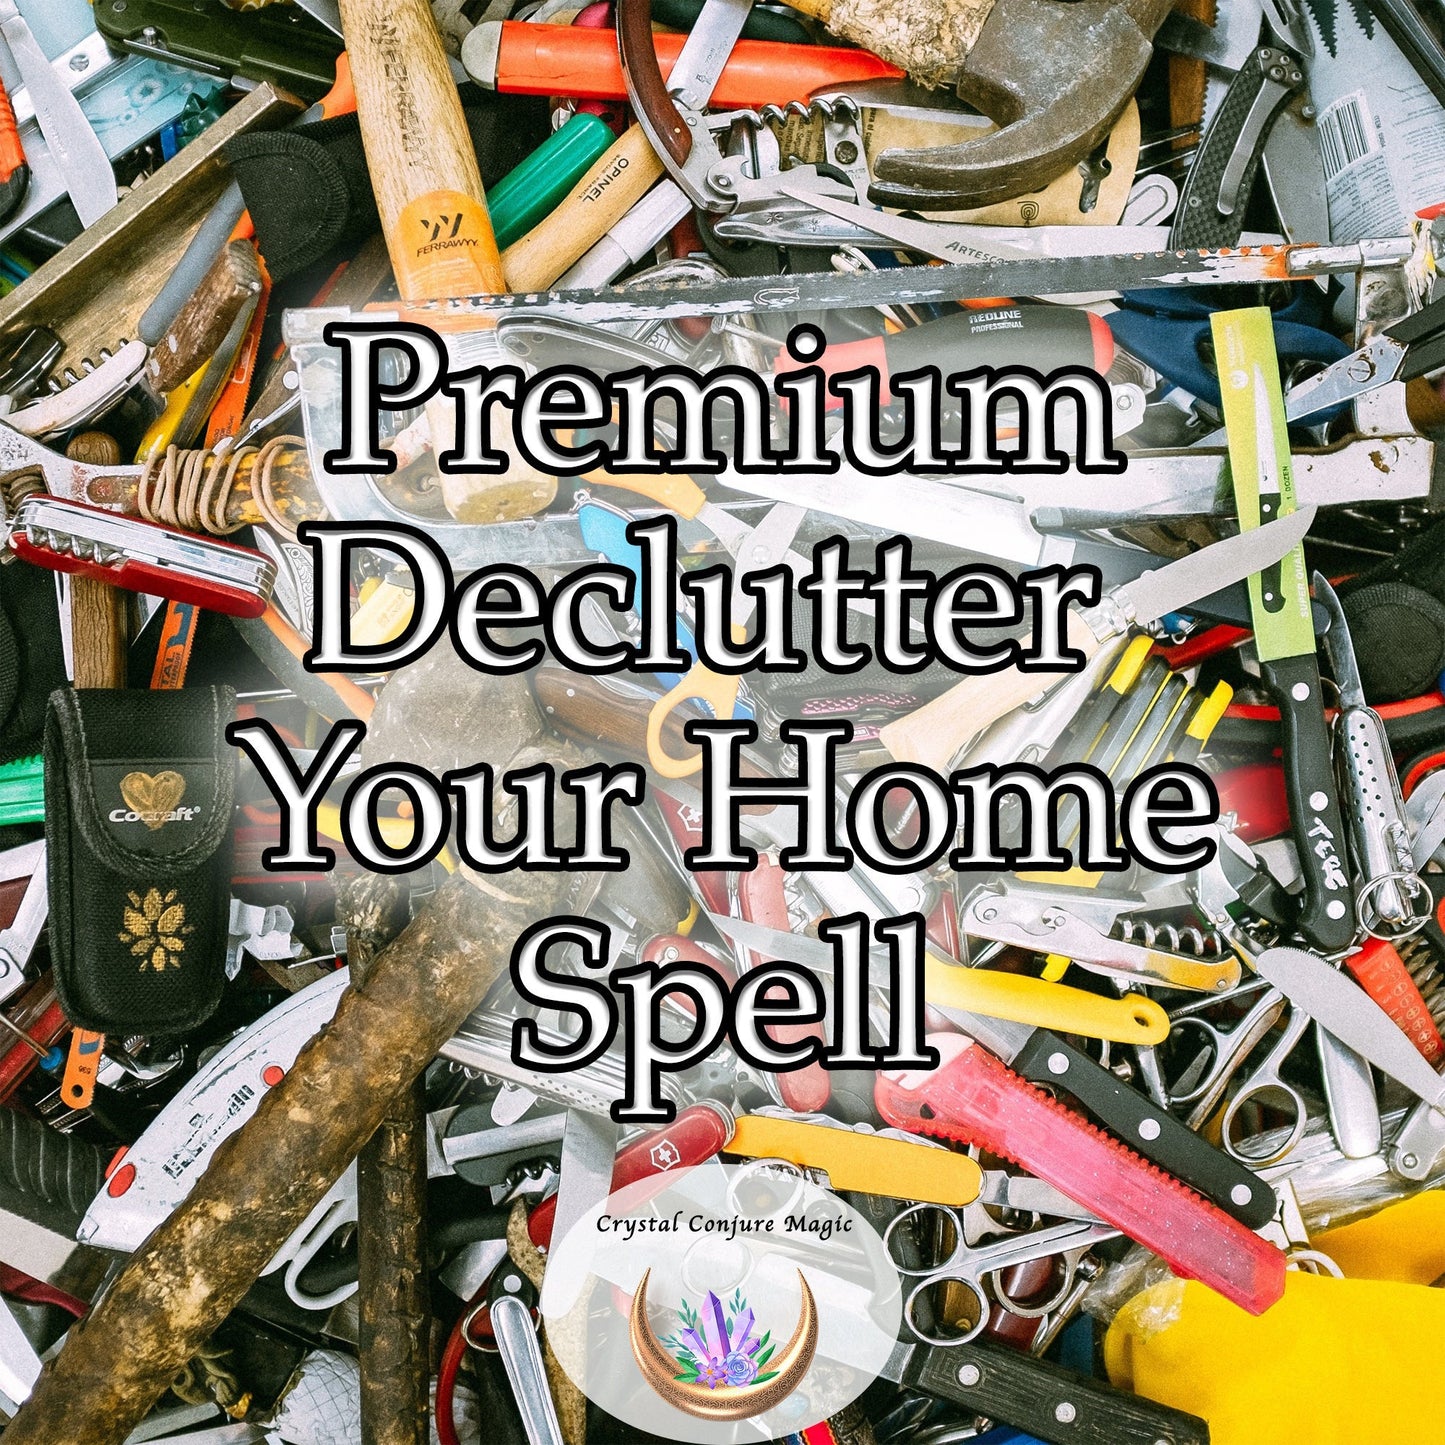 Premium Declutter Your Home Spell - Get organized, get control, and get going on declutter now